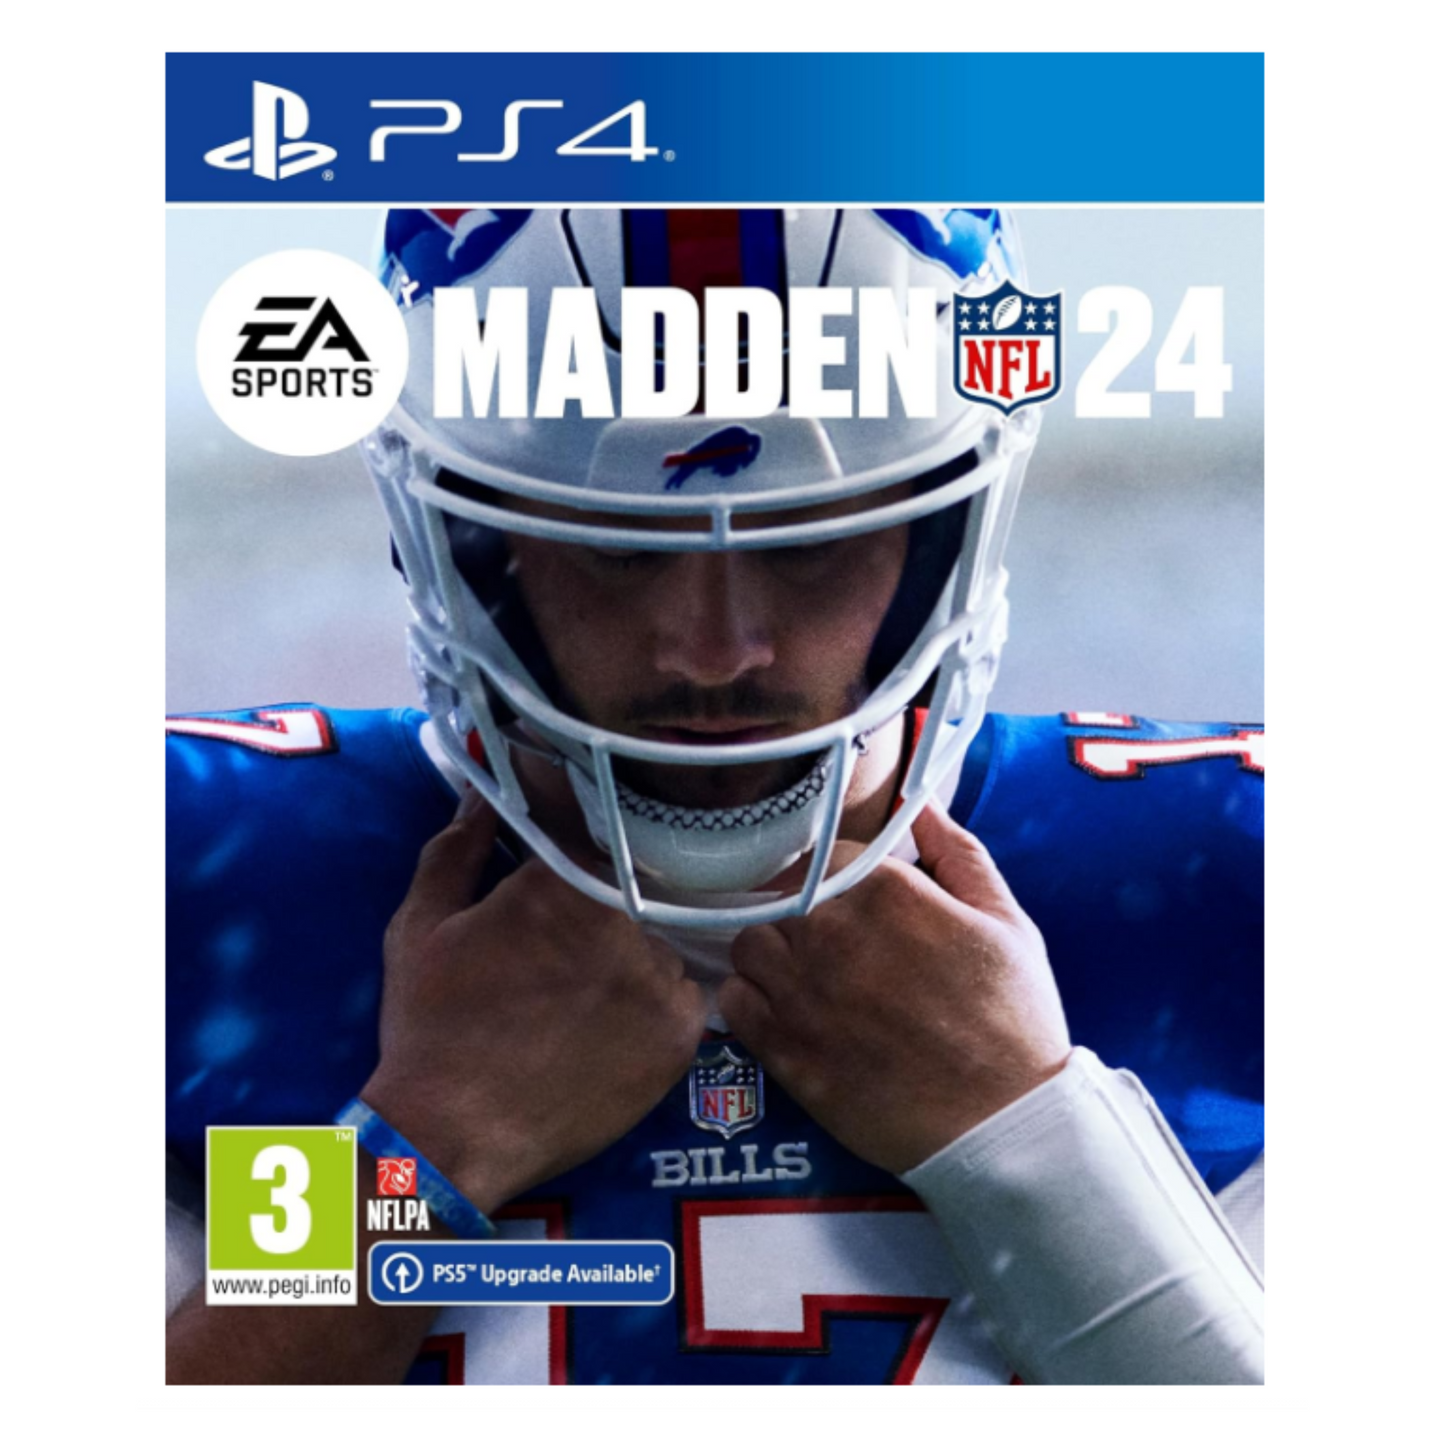 NFL 24 Video Game for Playstation 4